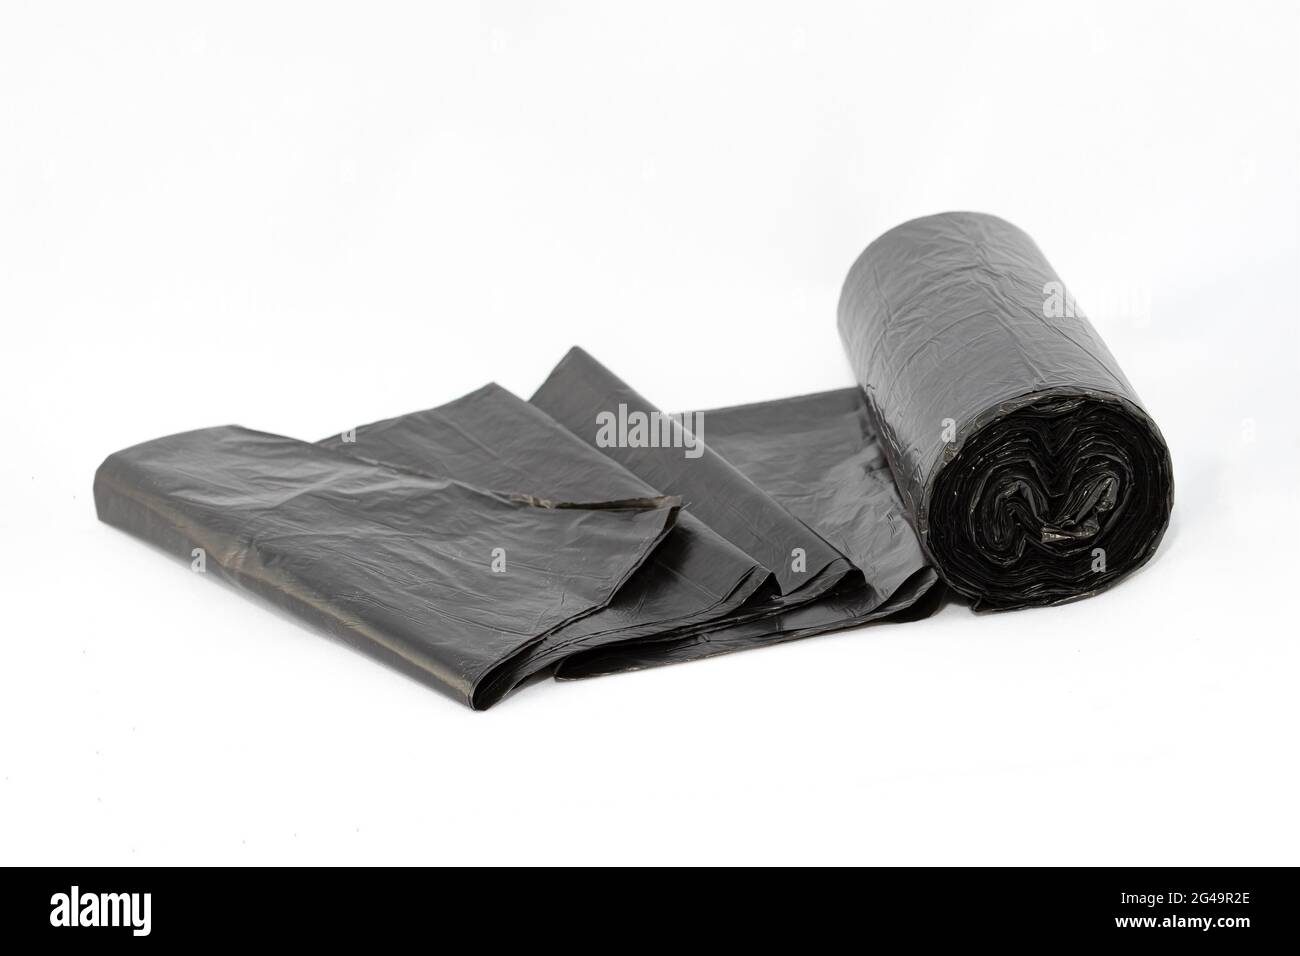 https://c8.alamy.com/comp/2G49R2E/black-polyethylene-garbage-bags-on-white-background-close-up-the-roll-of-plastic-junk-package-2G49R2E.jpg